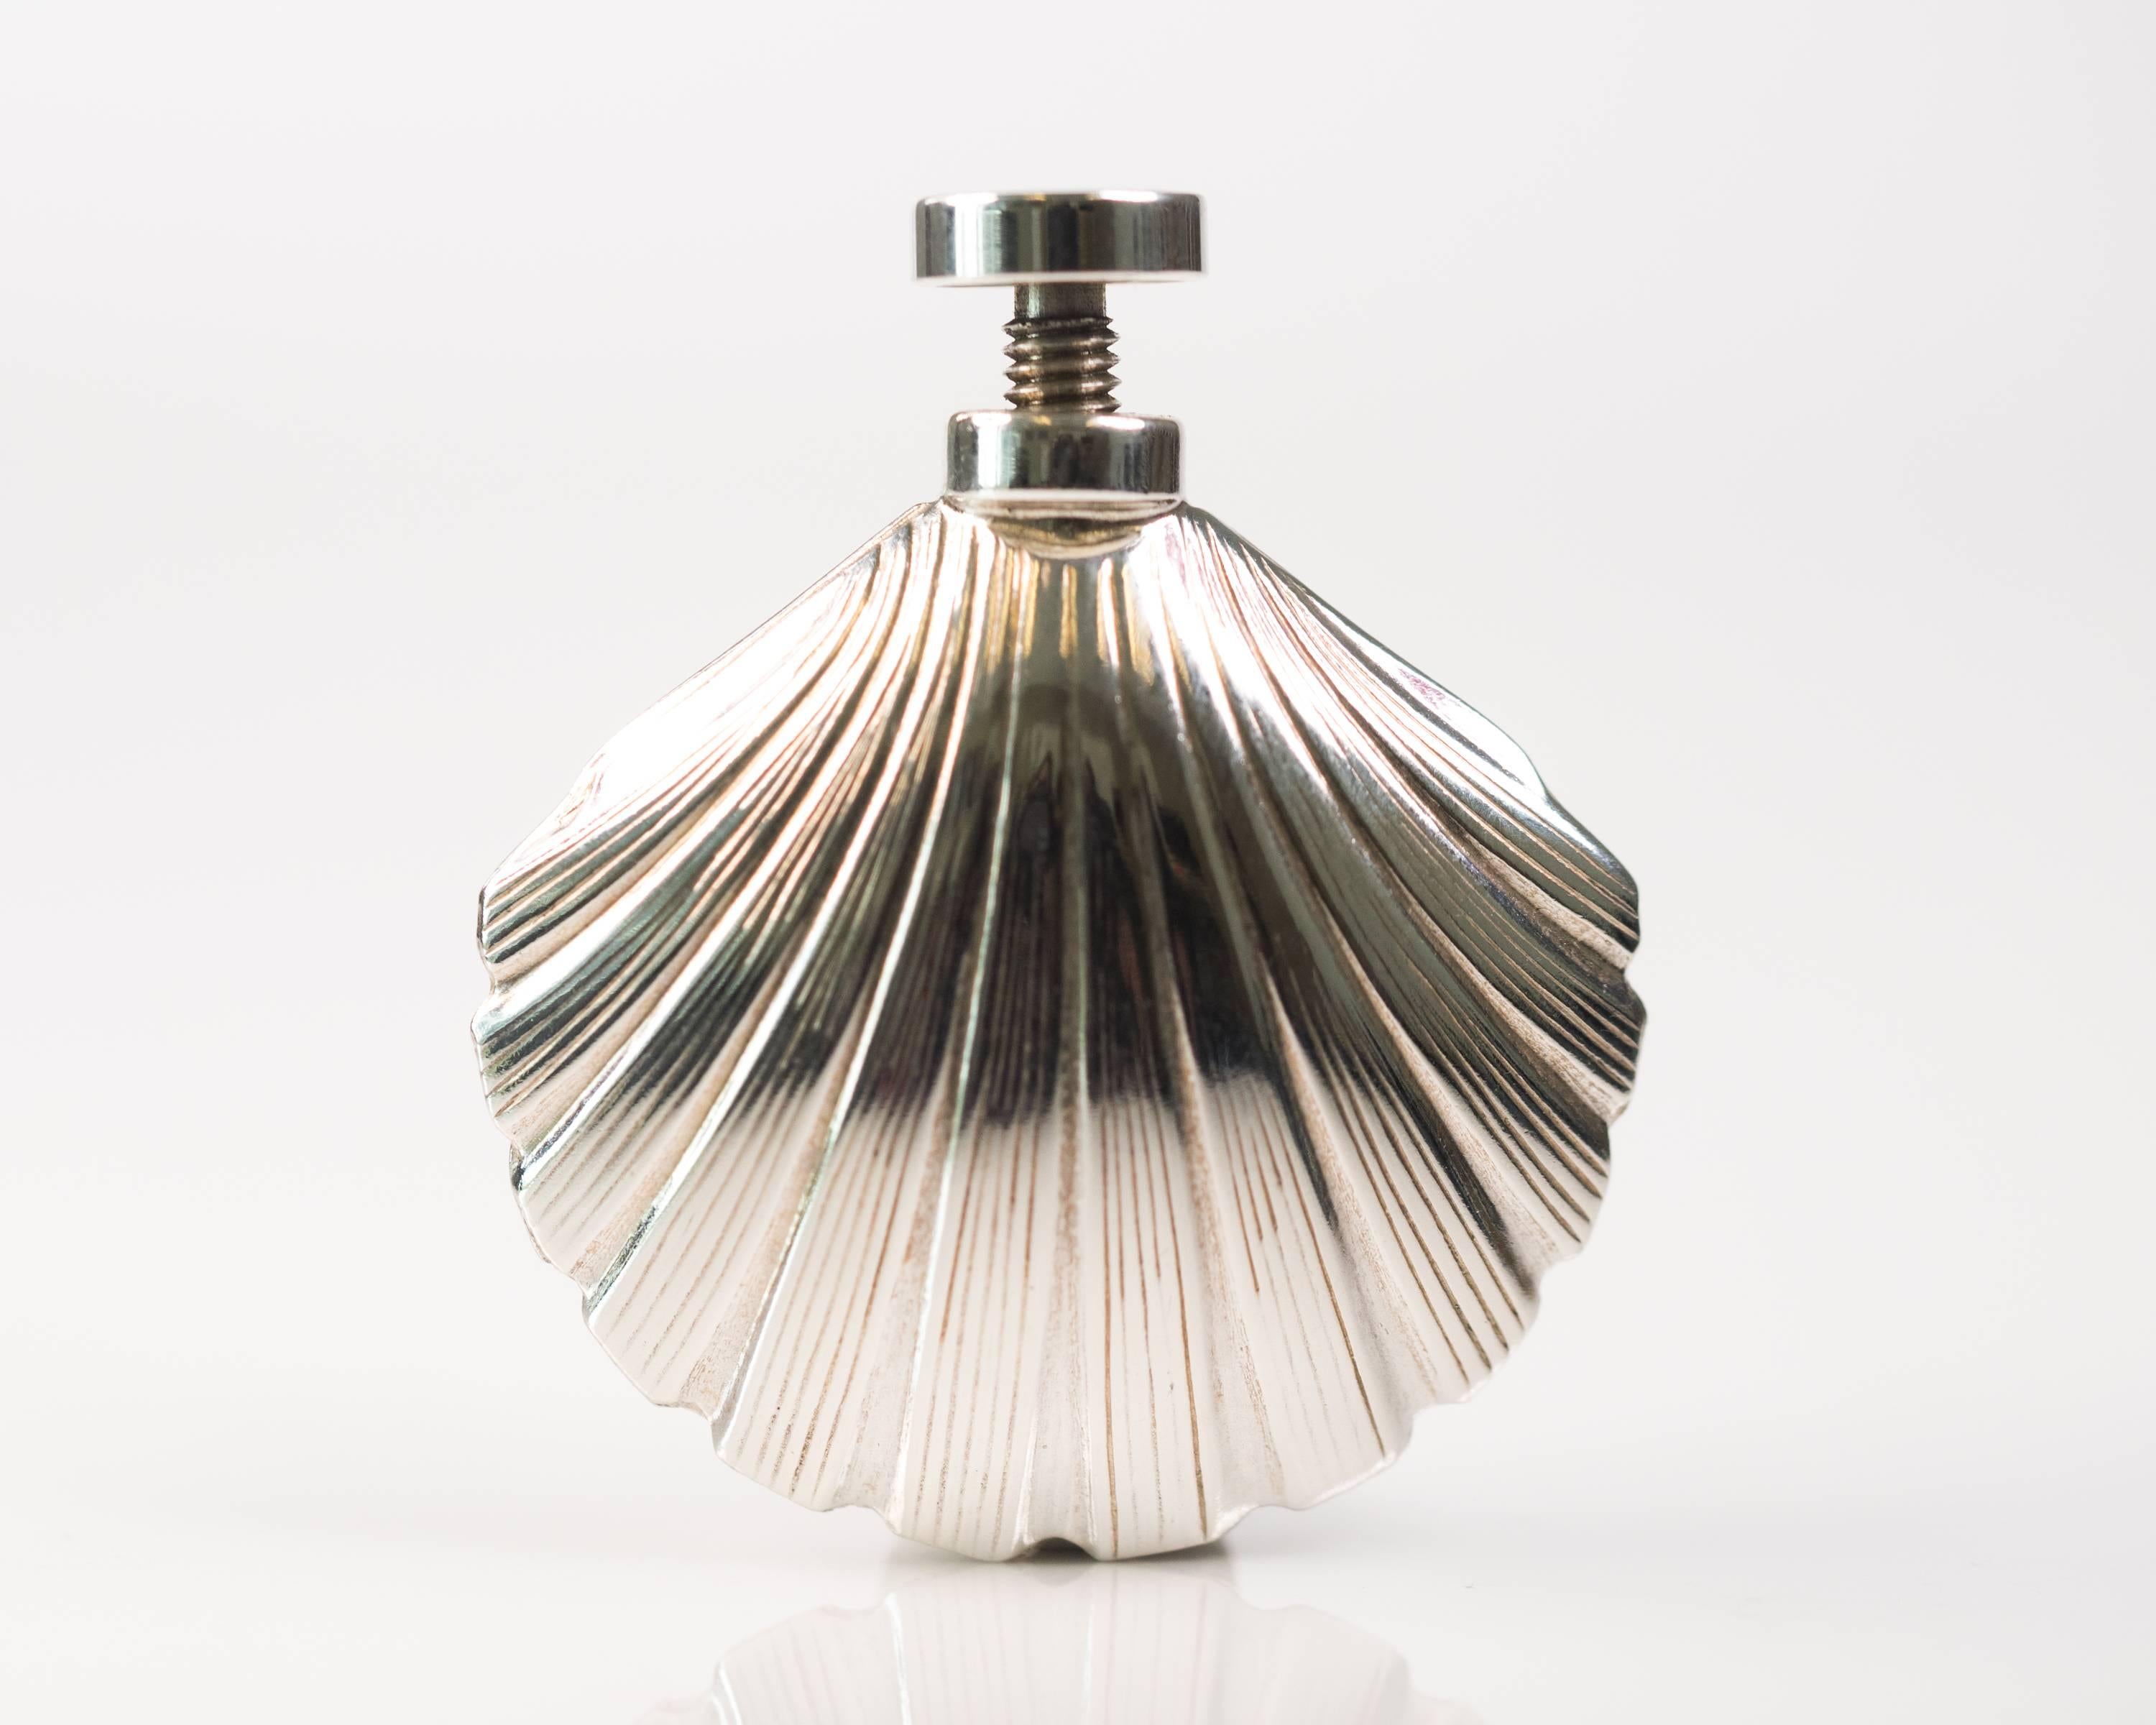 1960s Tiffany and Co Sterling Silver Scallop Sea Shell Perfume Bottle

Features a sterling silver dauber with threaded end cap which screws securely into the bottle. The Sterling Silver bottle is in the shape of a scallop sea shell. The shell is